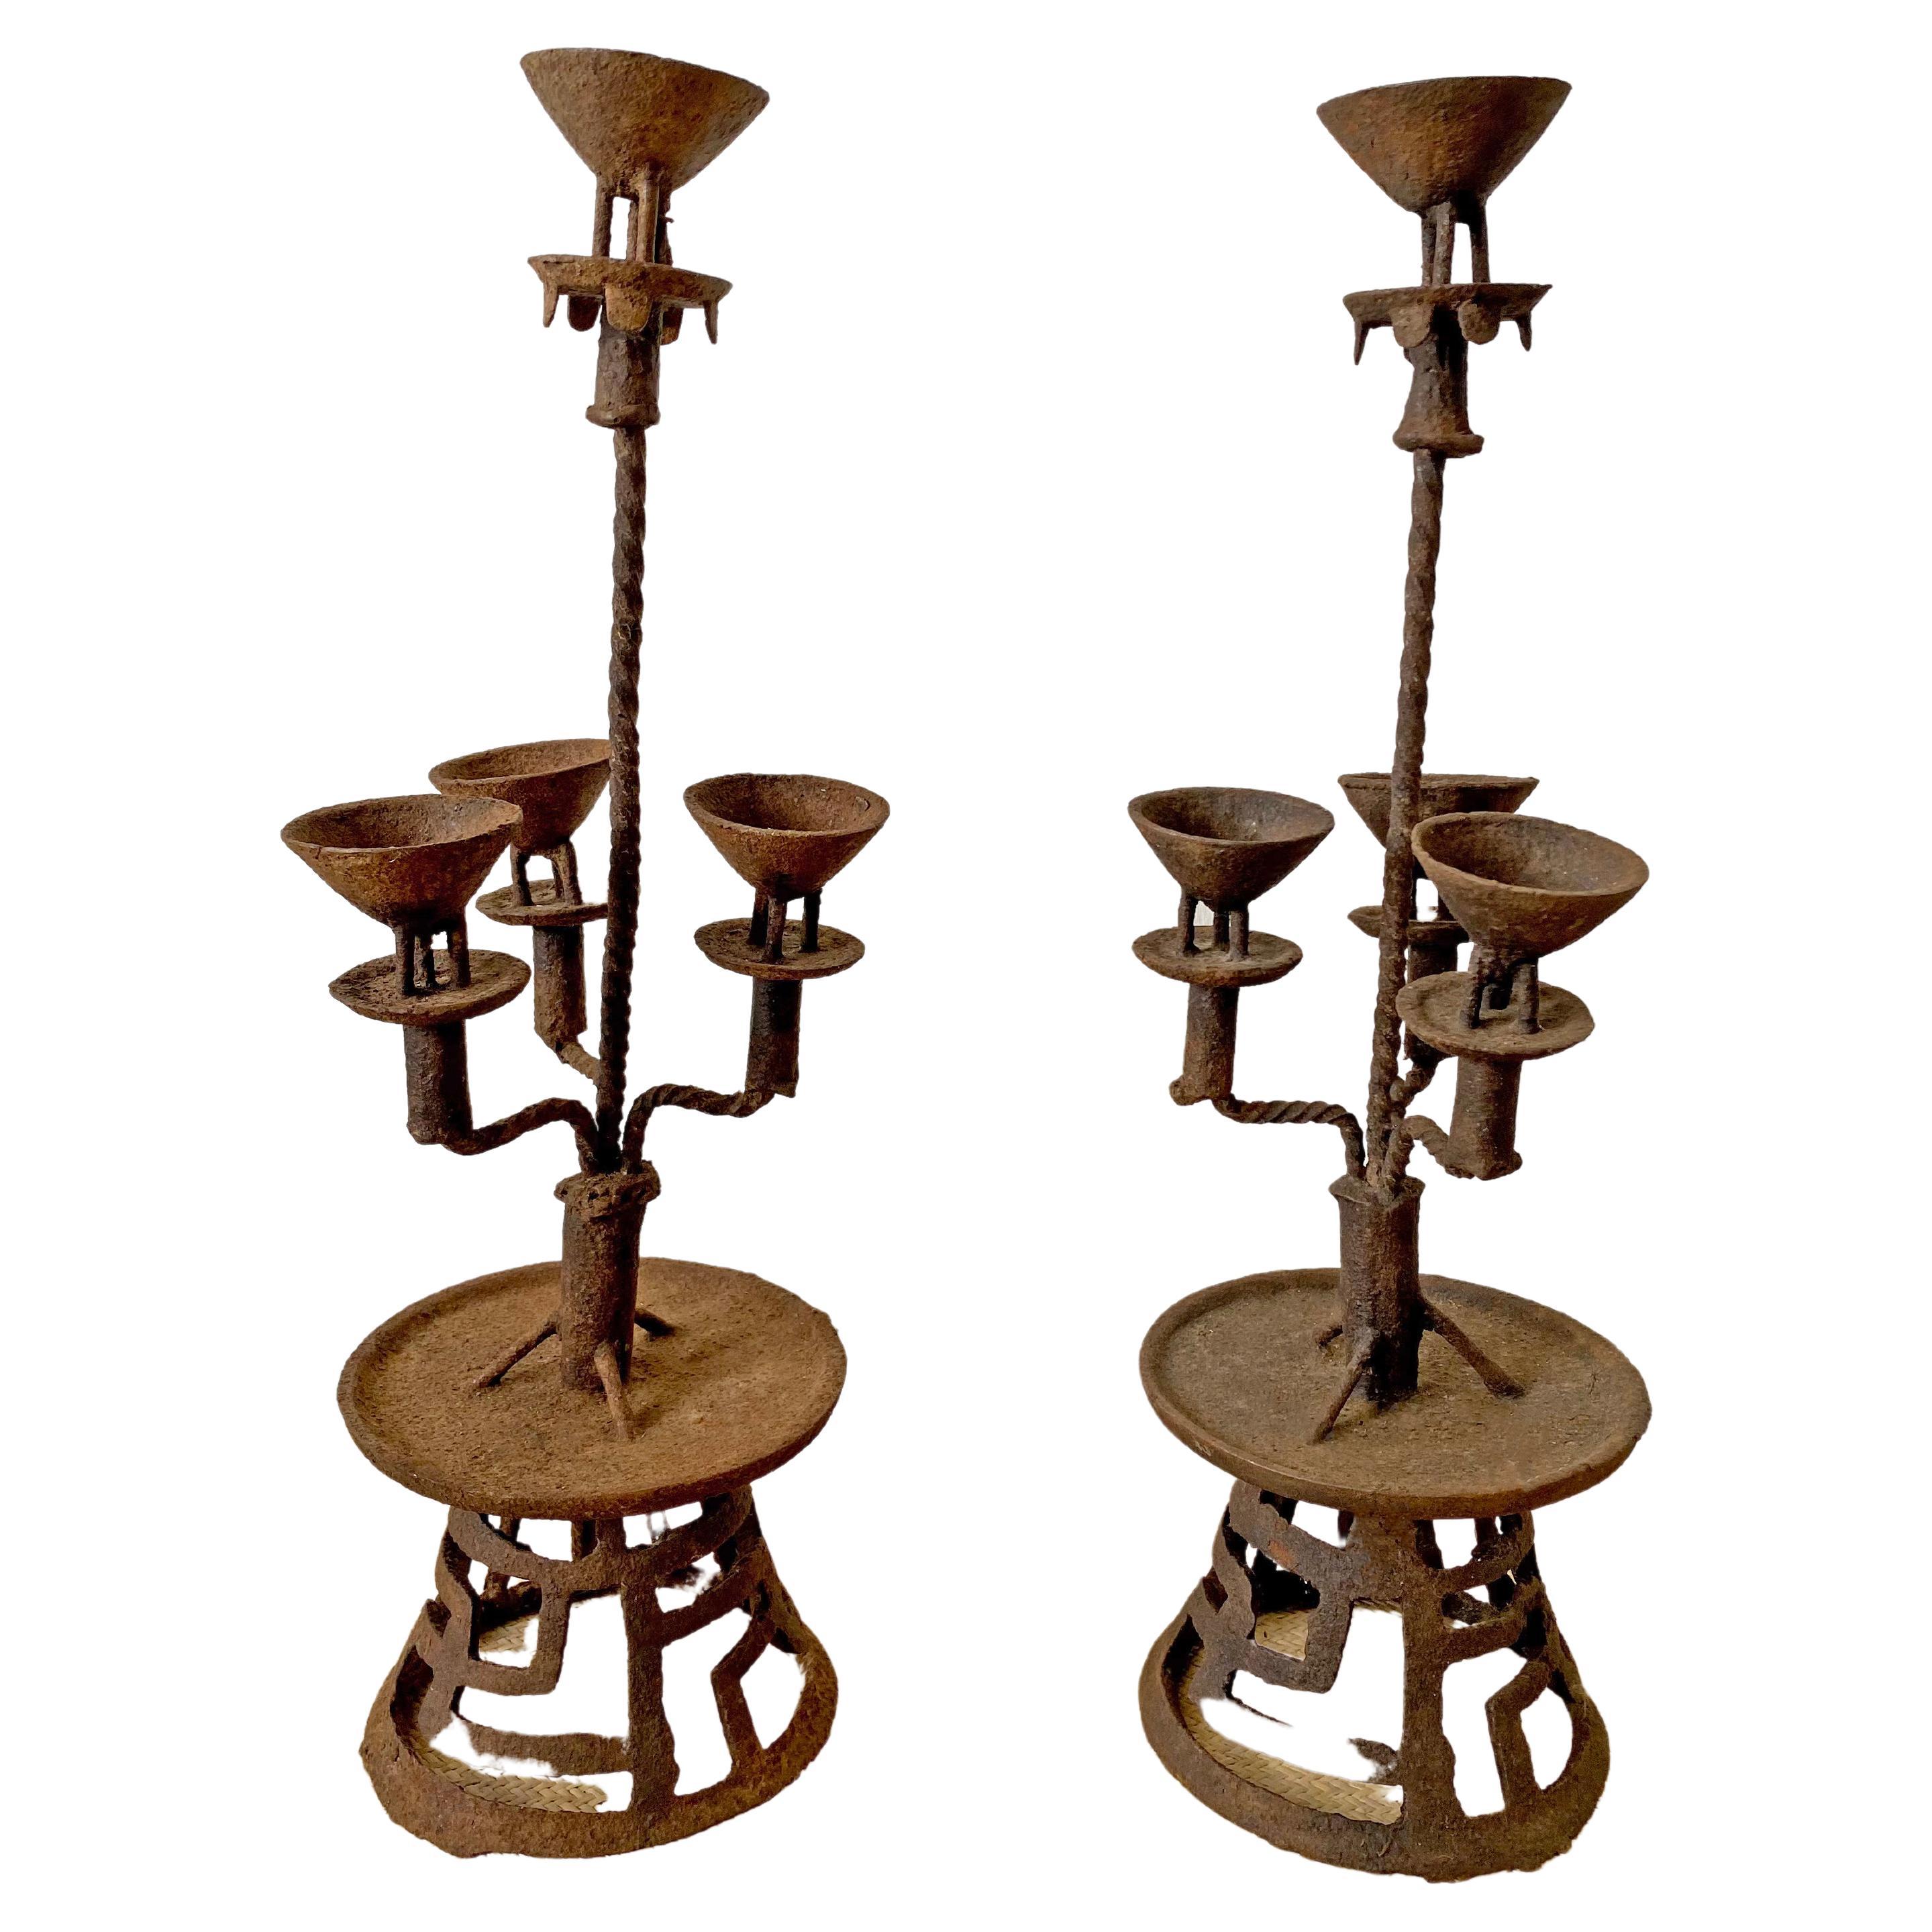 Chinese Wrought Iron Candleholder Pair, Early 20th Century For Sale